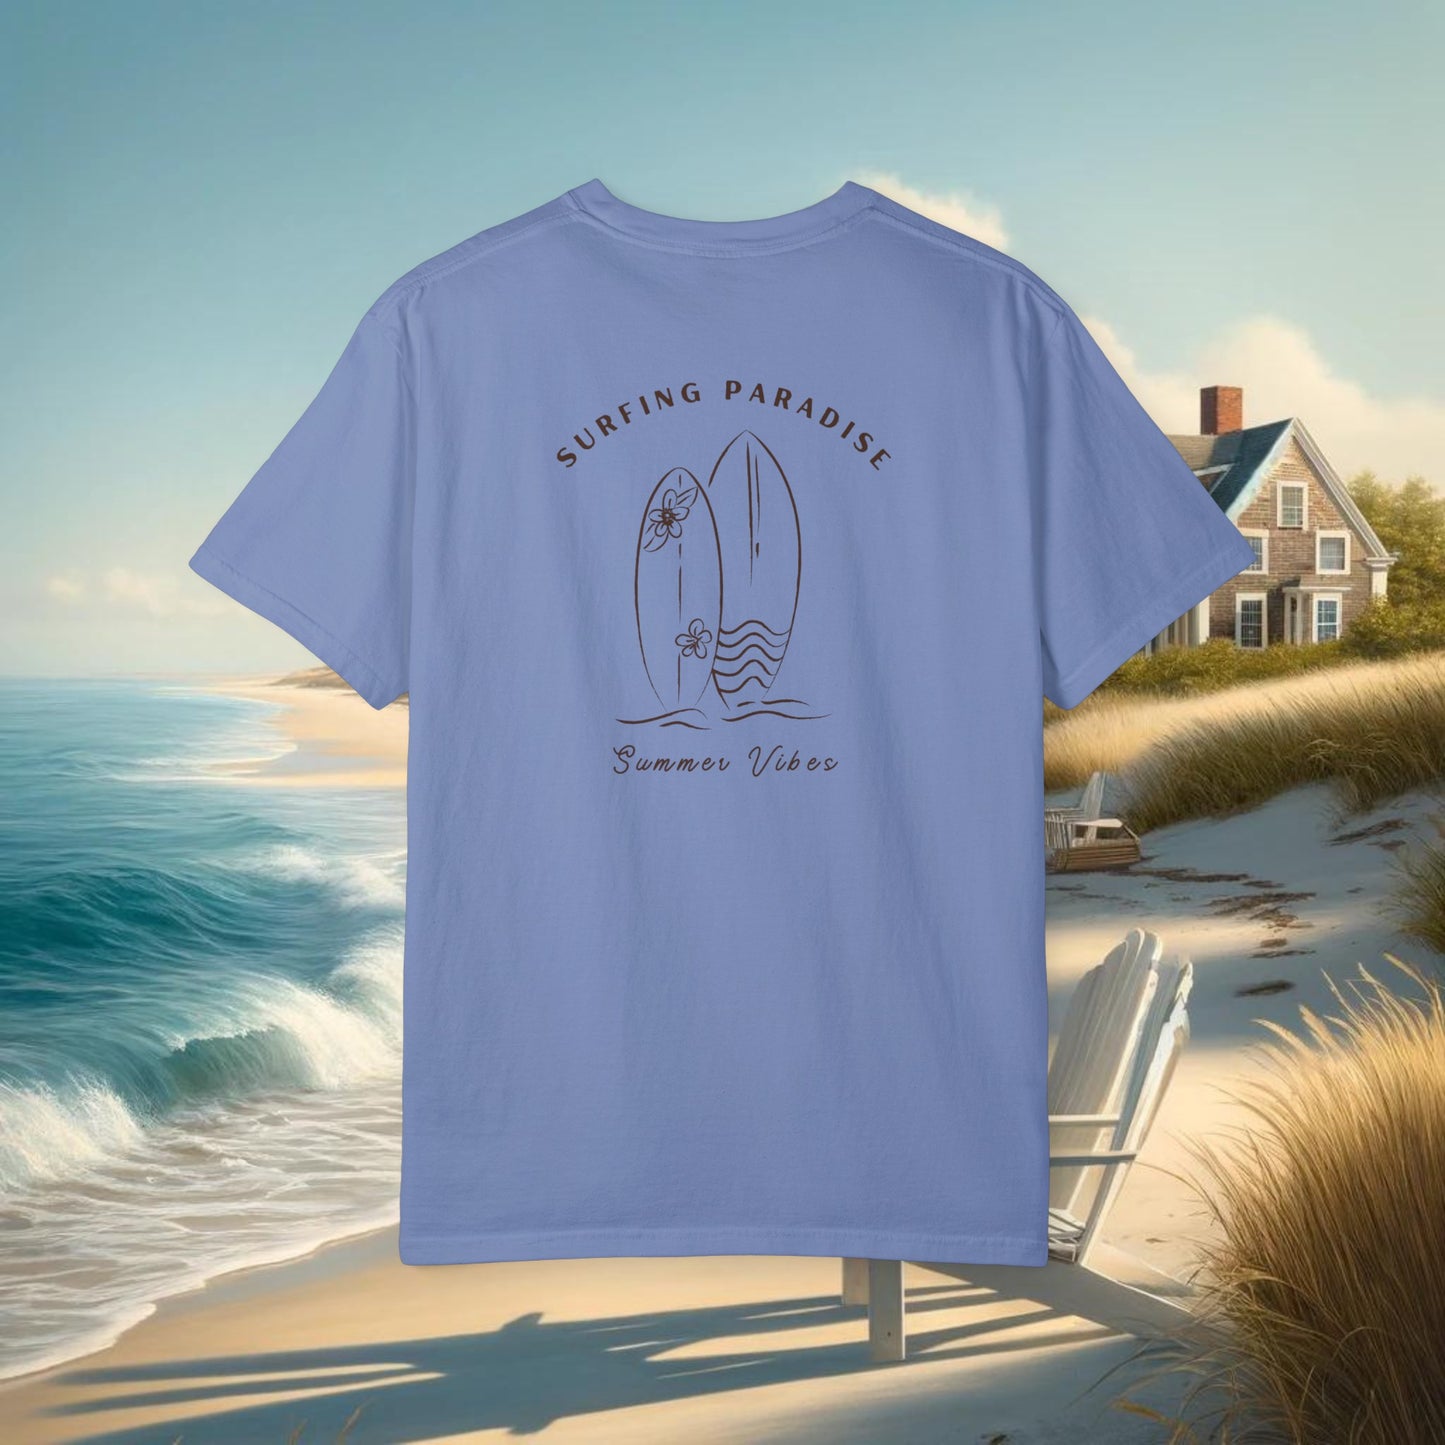 Summer Vibes T-Shirt - Comfort Colors 1717, 100% Ring-Spun Cotton, Relaxed Fit